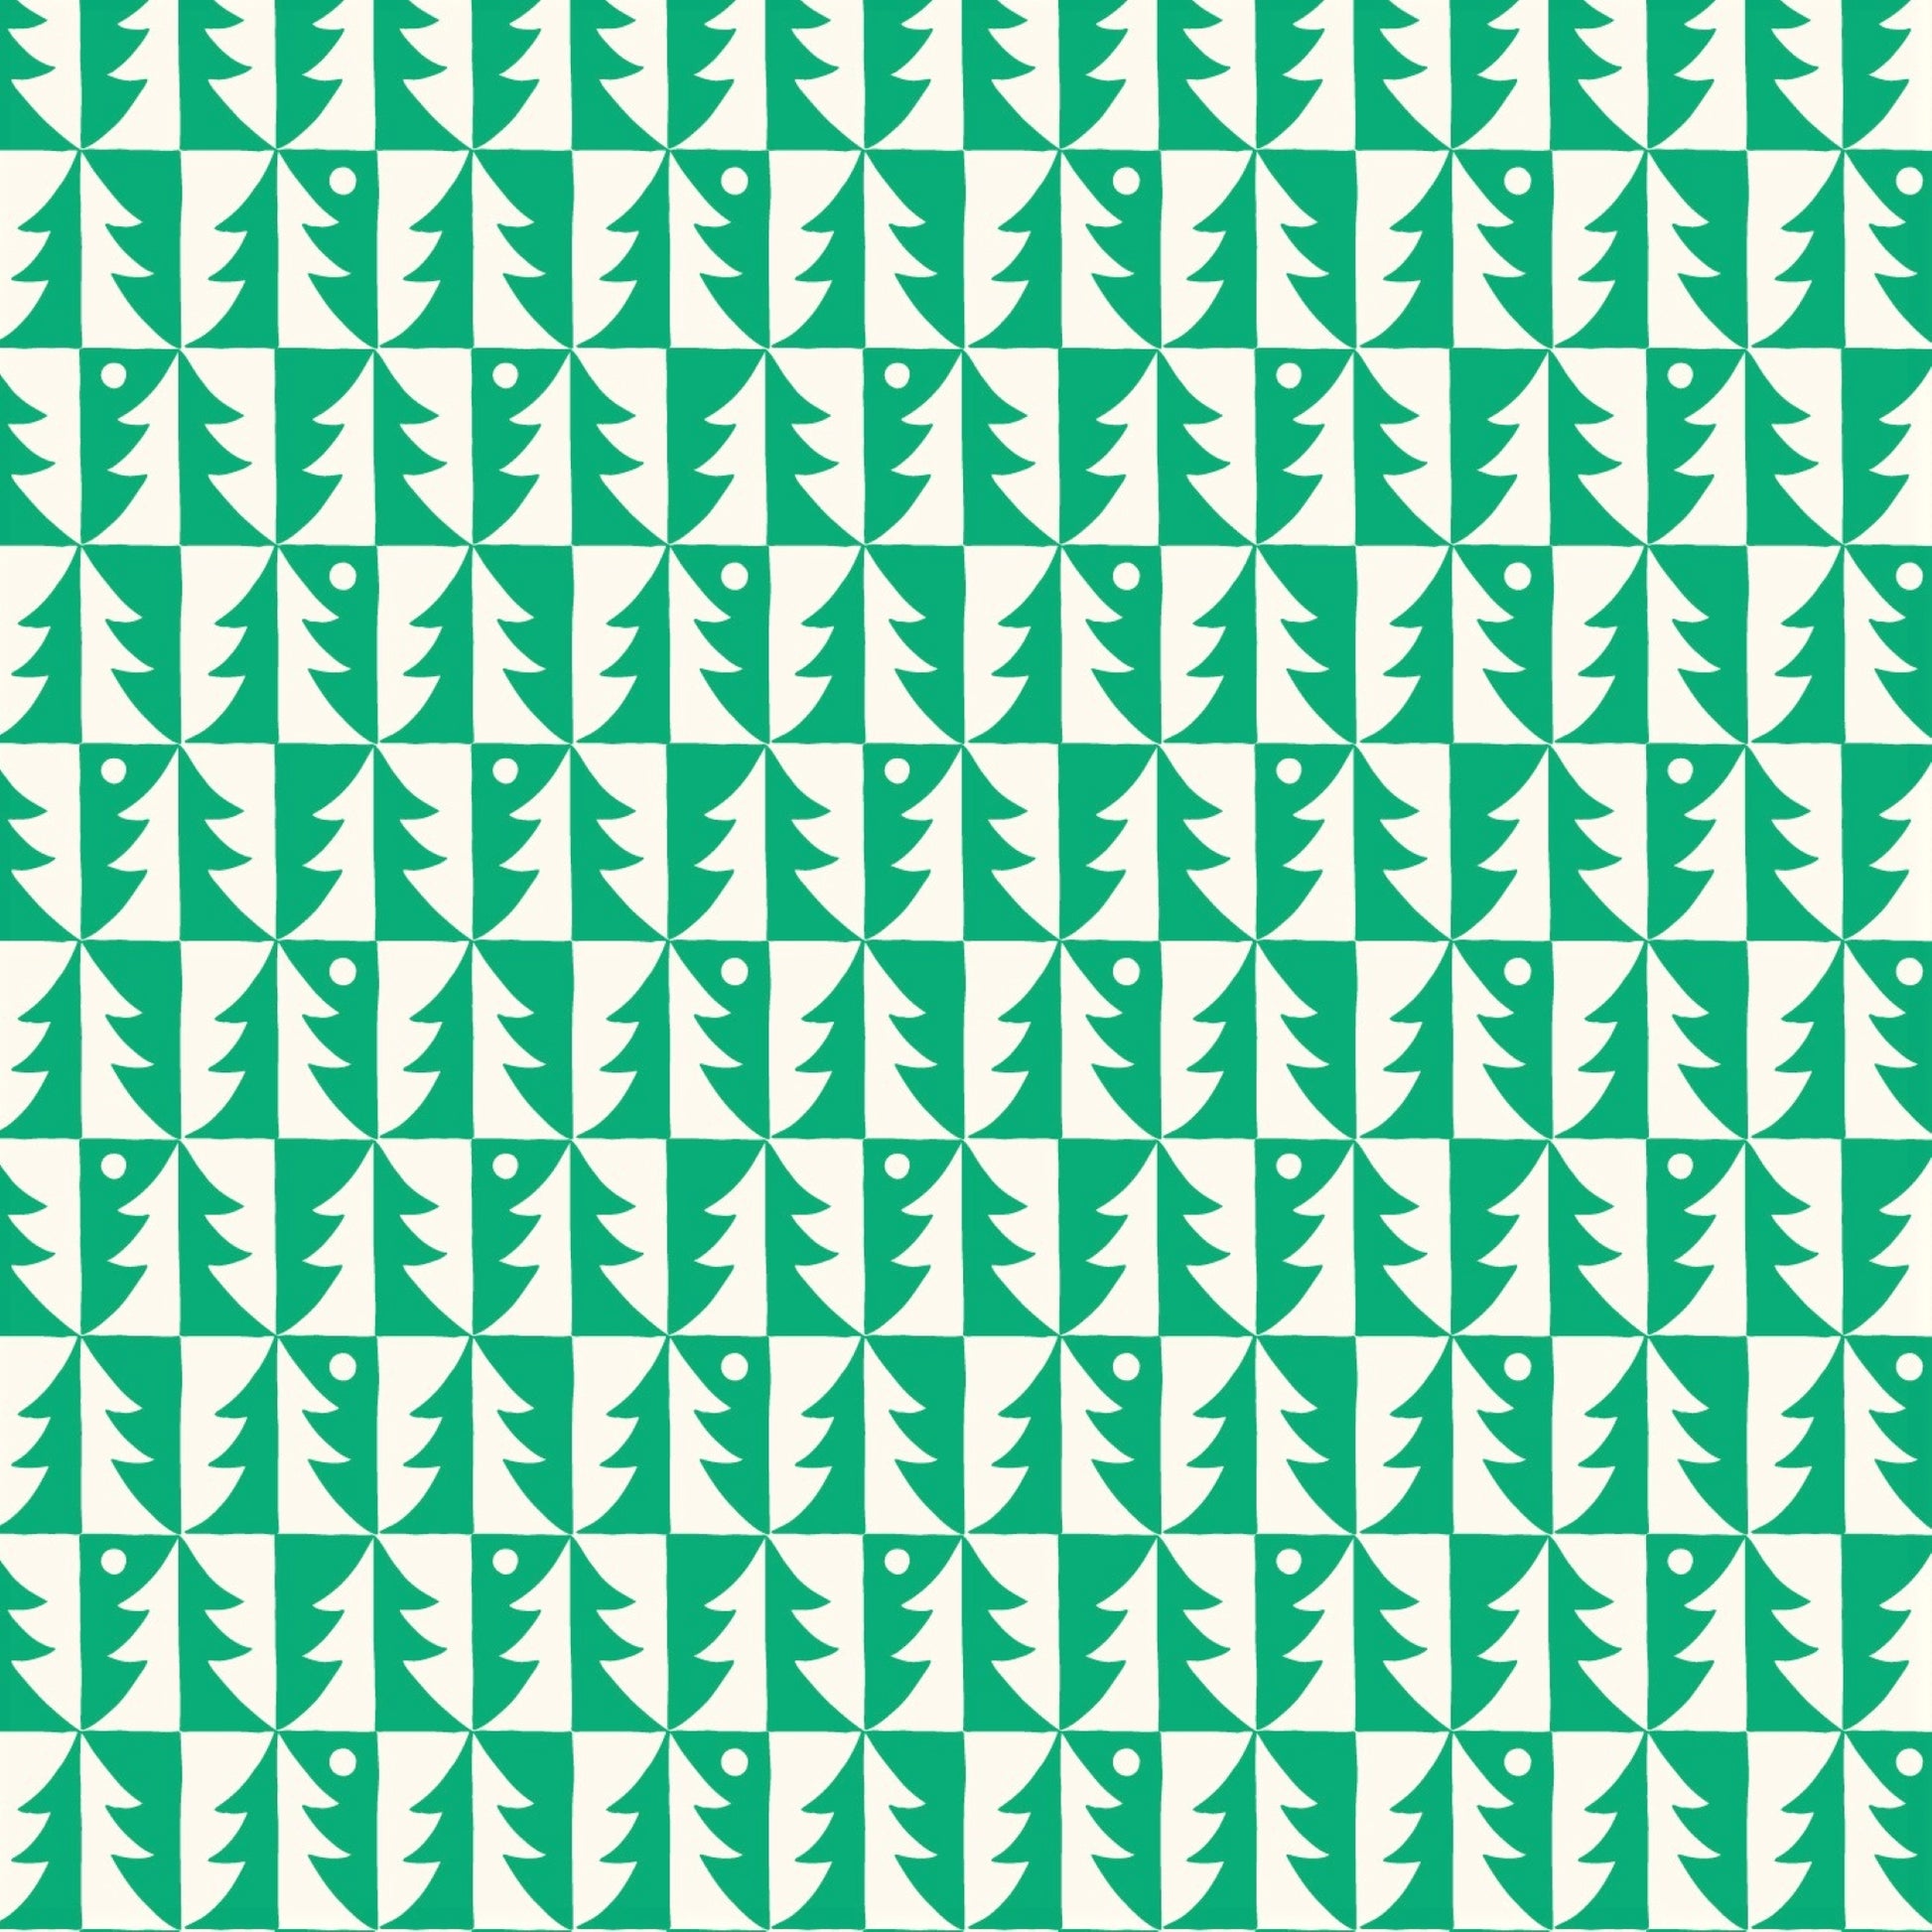 patterned paper, gift wrap, with all over pattern of green and white trees, by Ariana Martin